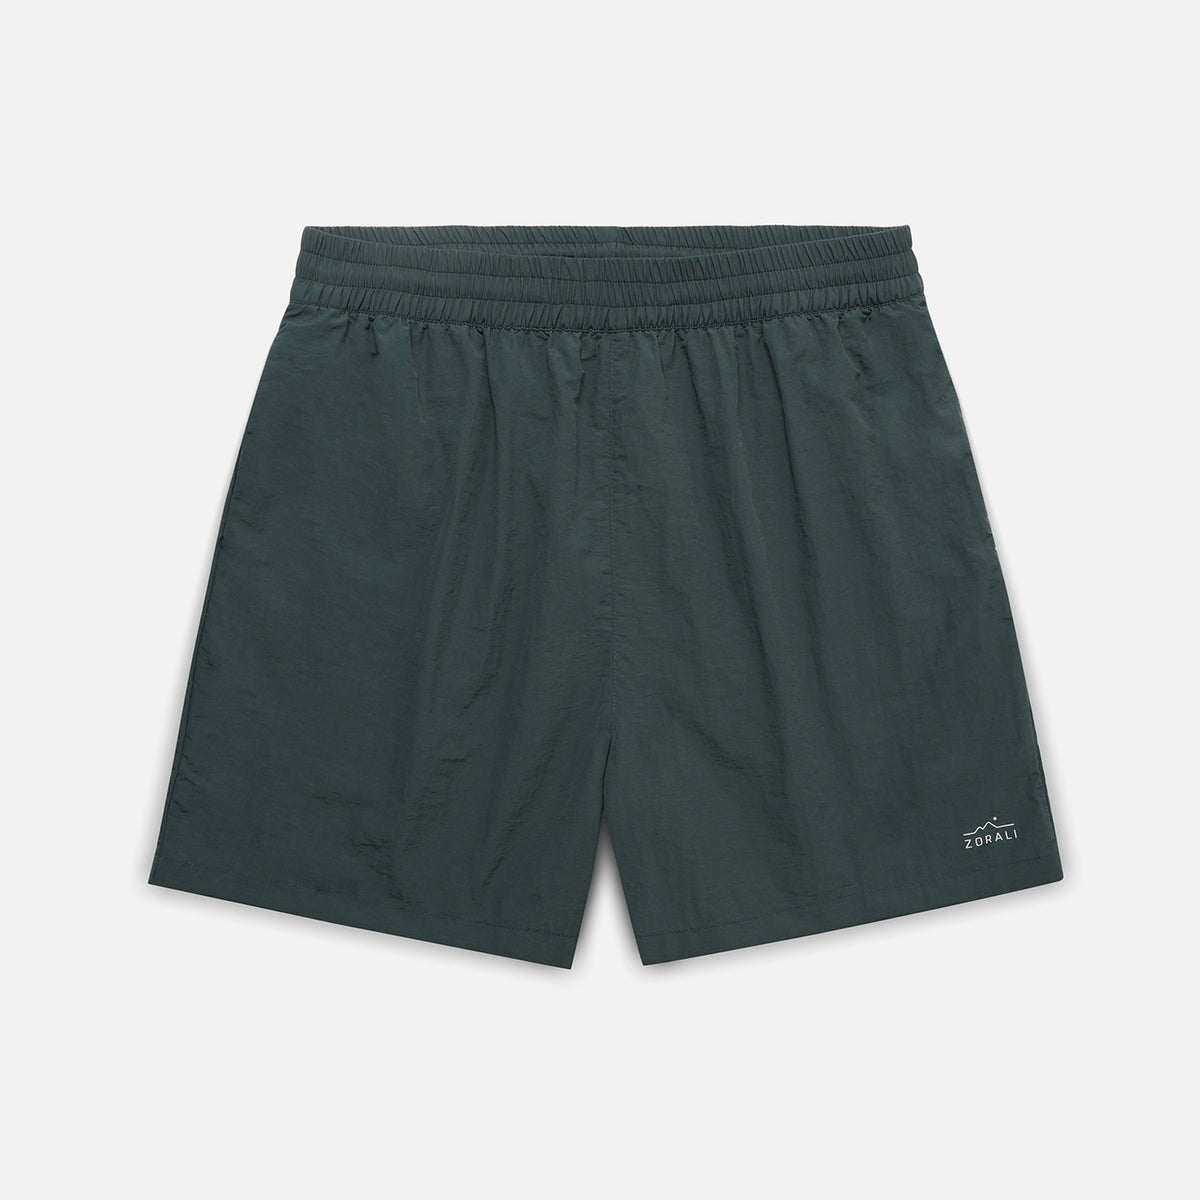 Womens Recycled Short Black